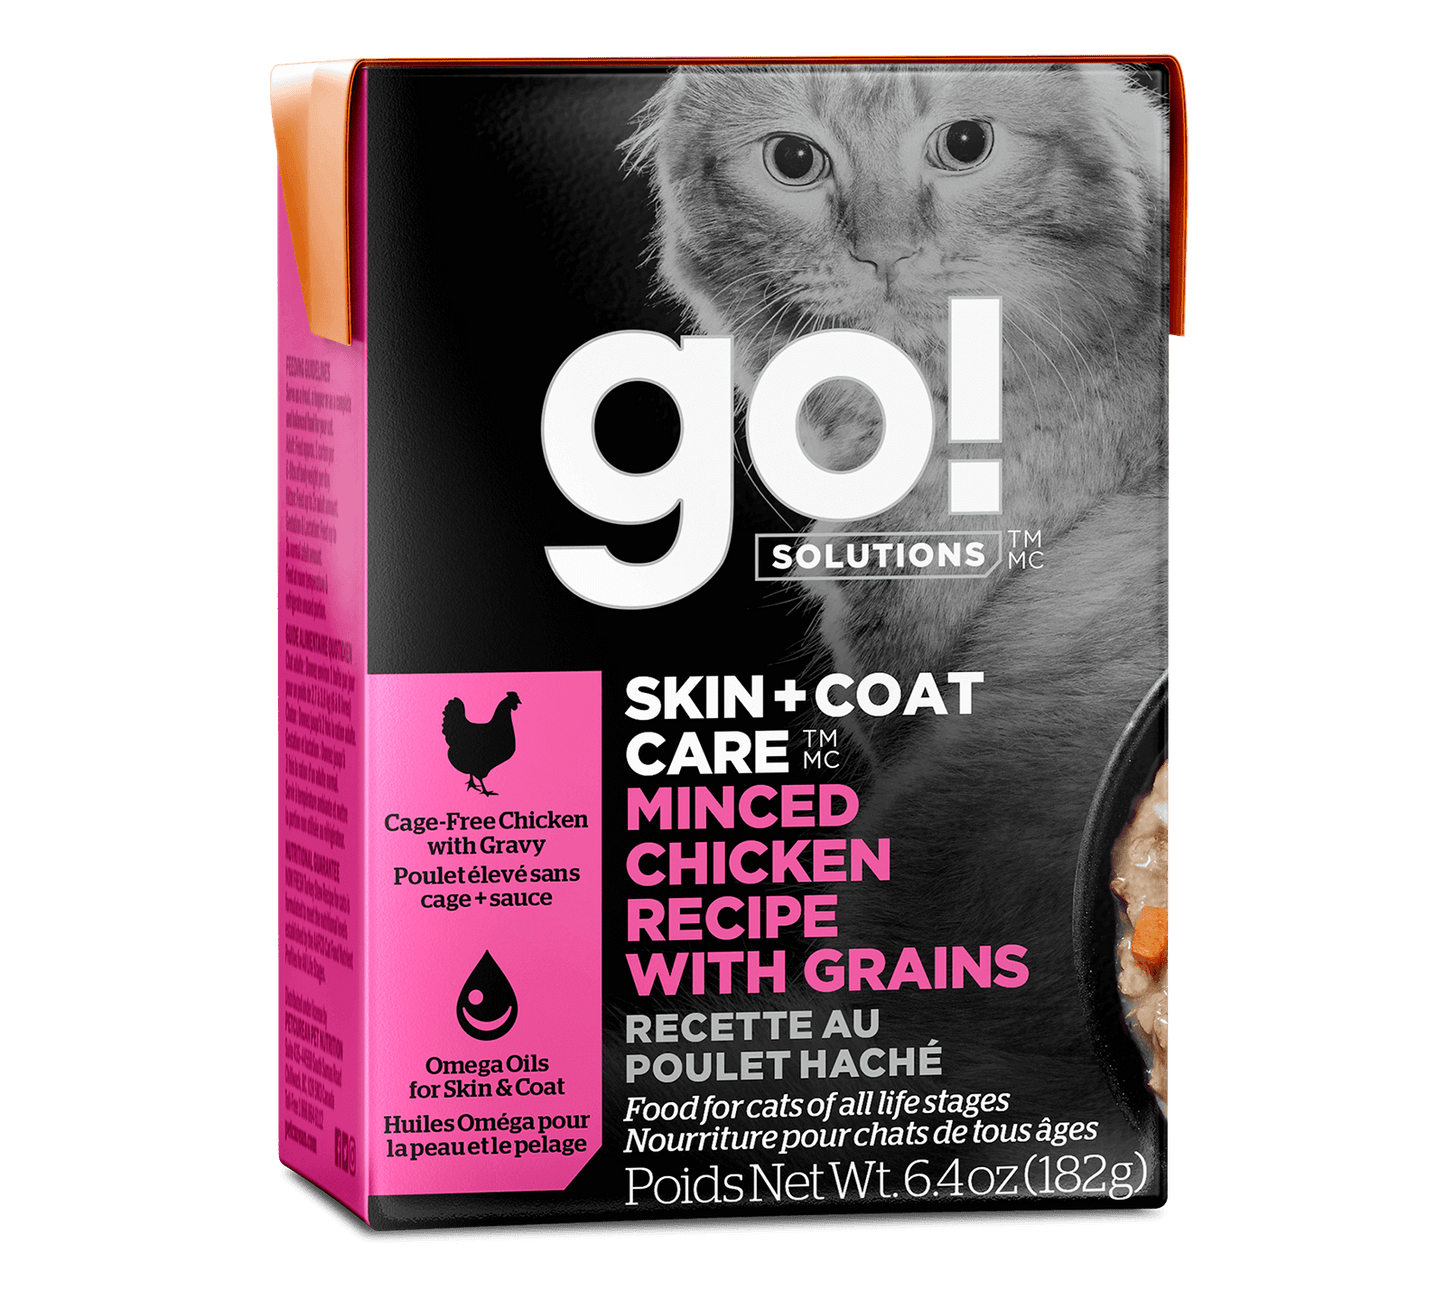 GO! SOLUTIONS SKIN + COAT CARE MINCED CHICKEN RECIPE WITH GRAINS FOR CATS